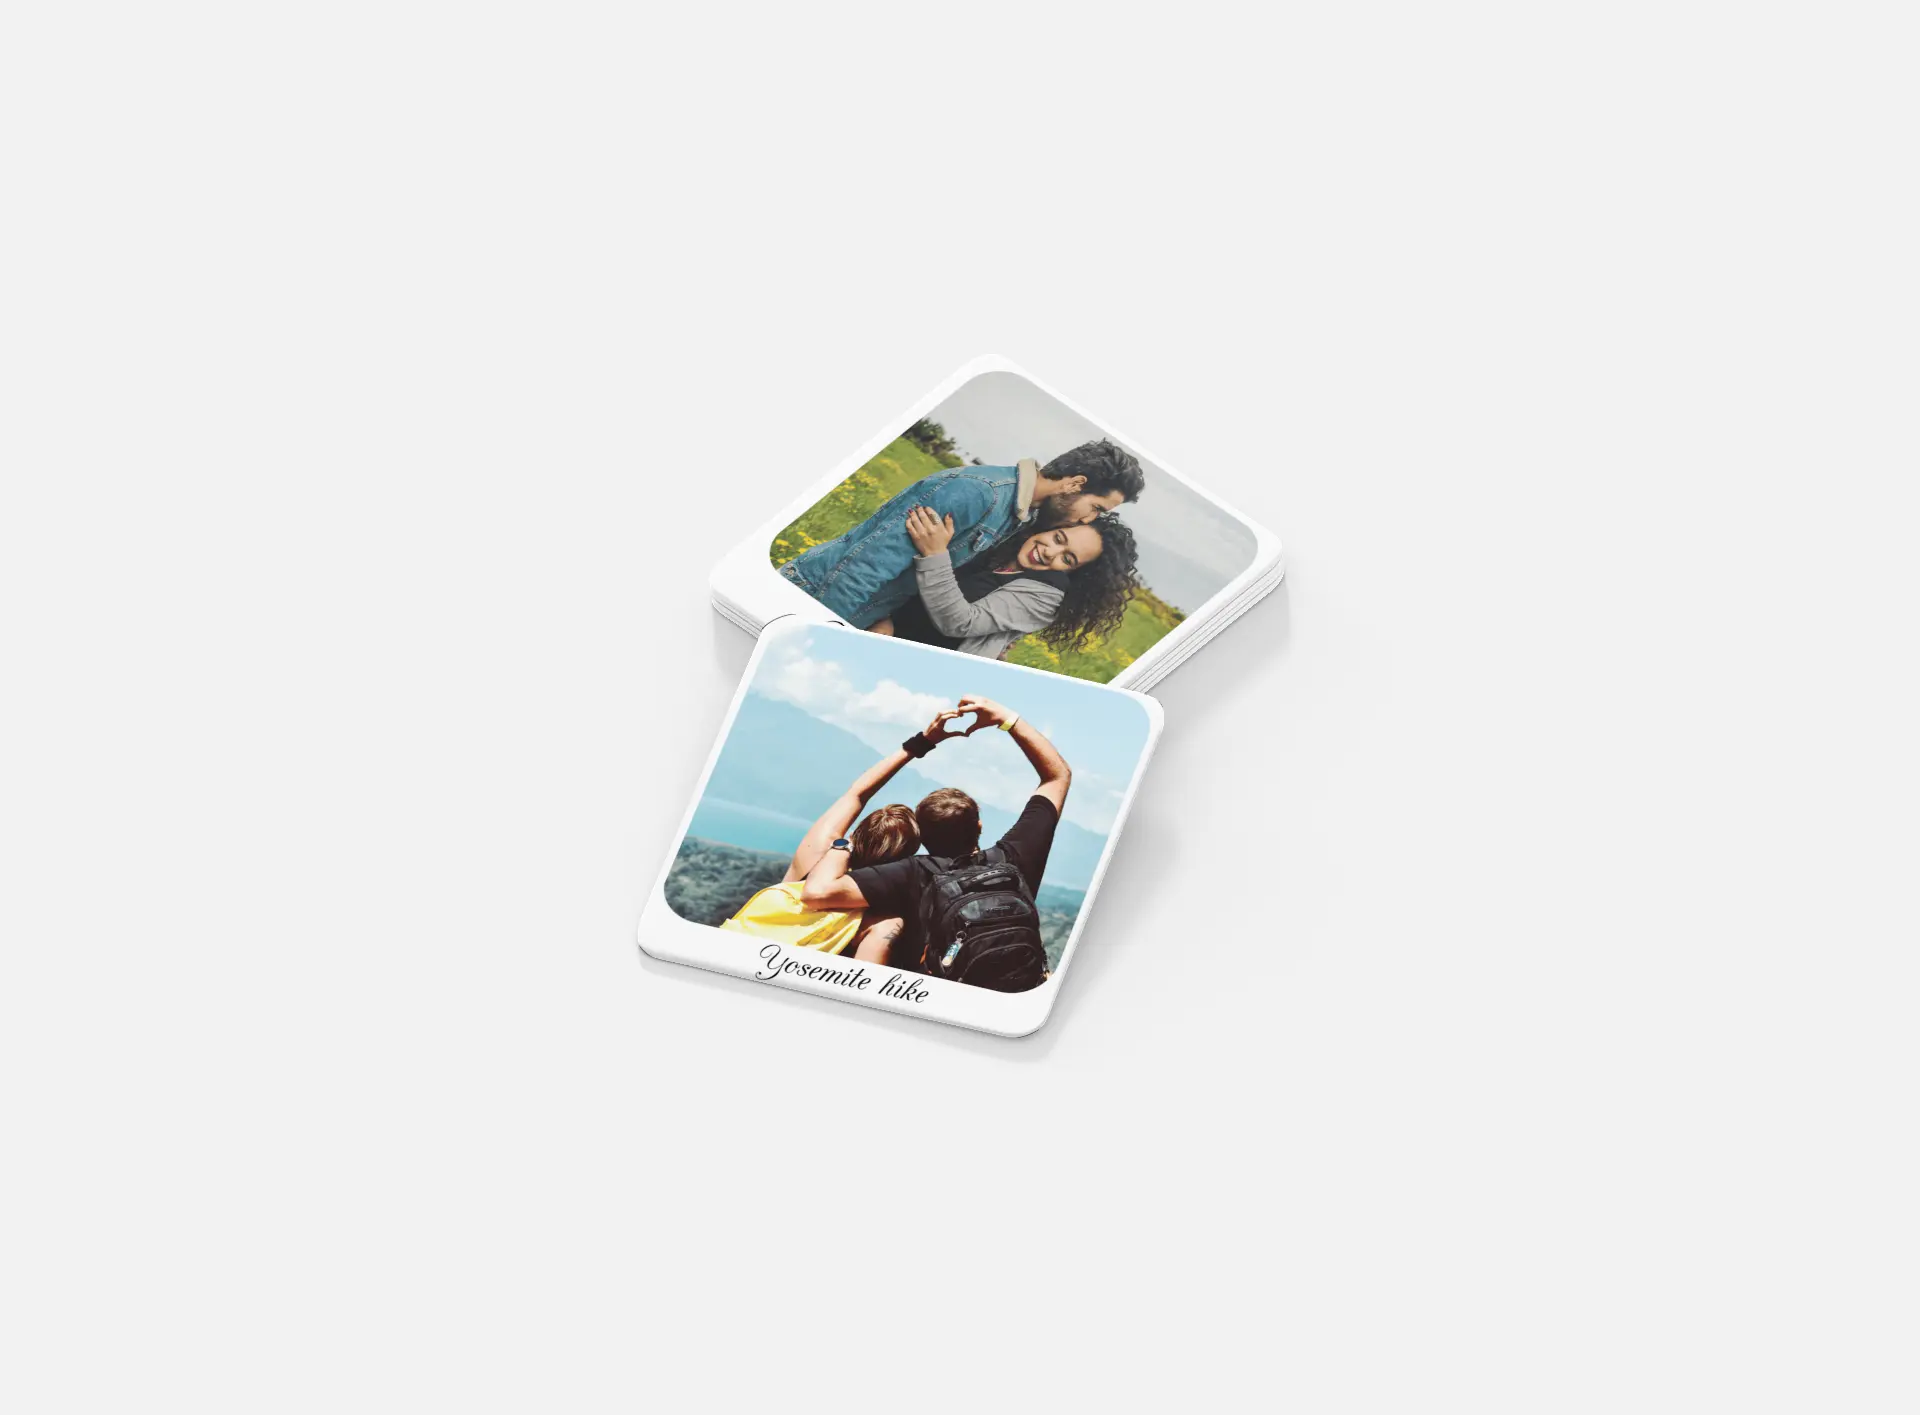 photo coasters- A unique and personal present for friends, family and loved ones